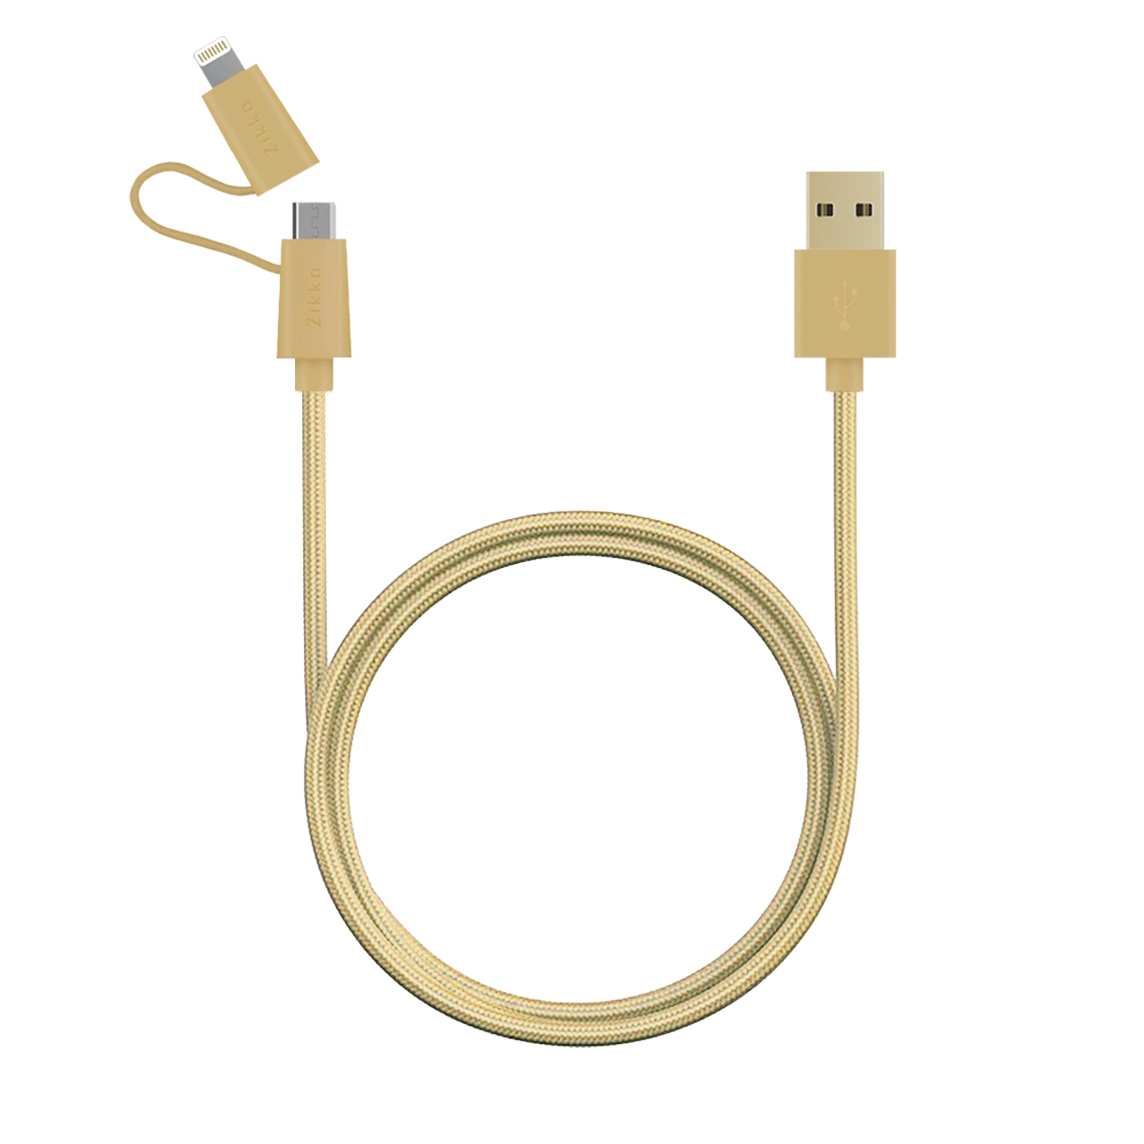 Zikko iPhone Lightning & Android Micro USB Cable - SC600 1.5m